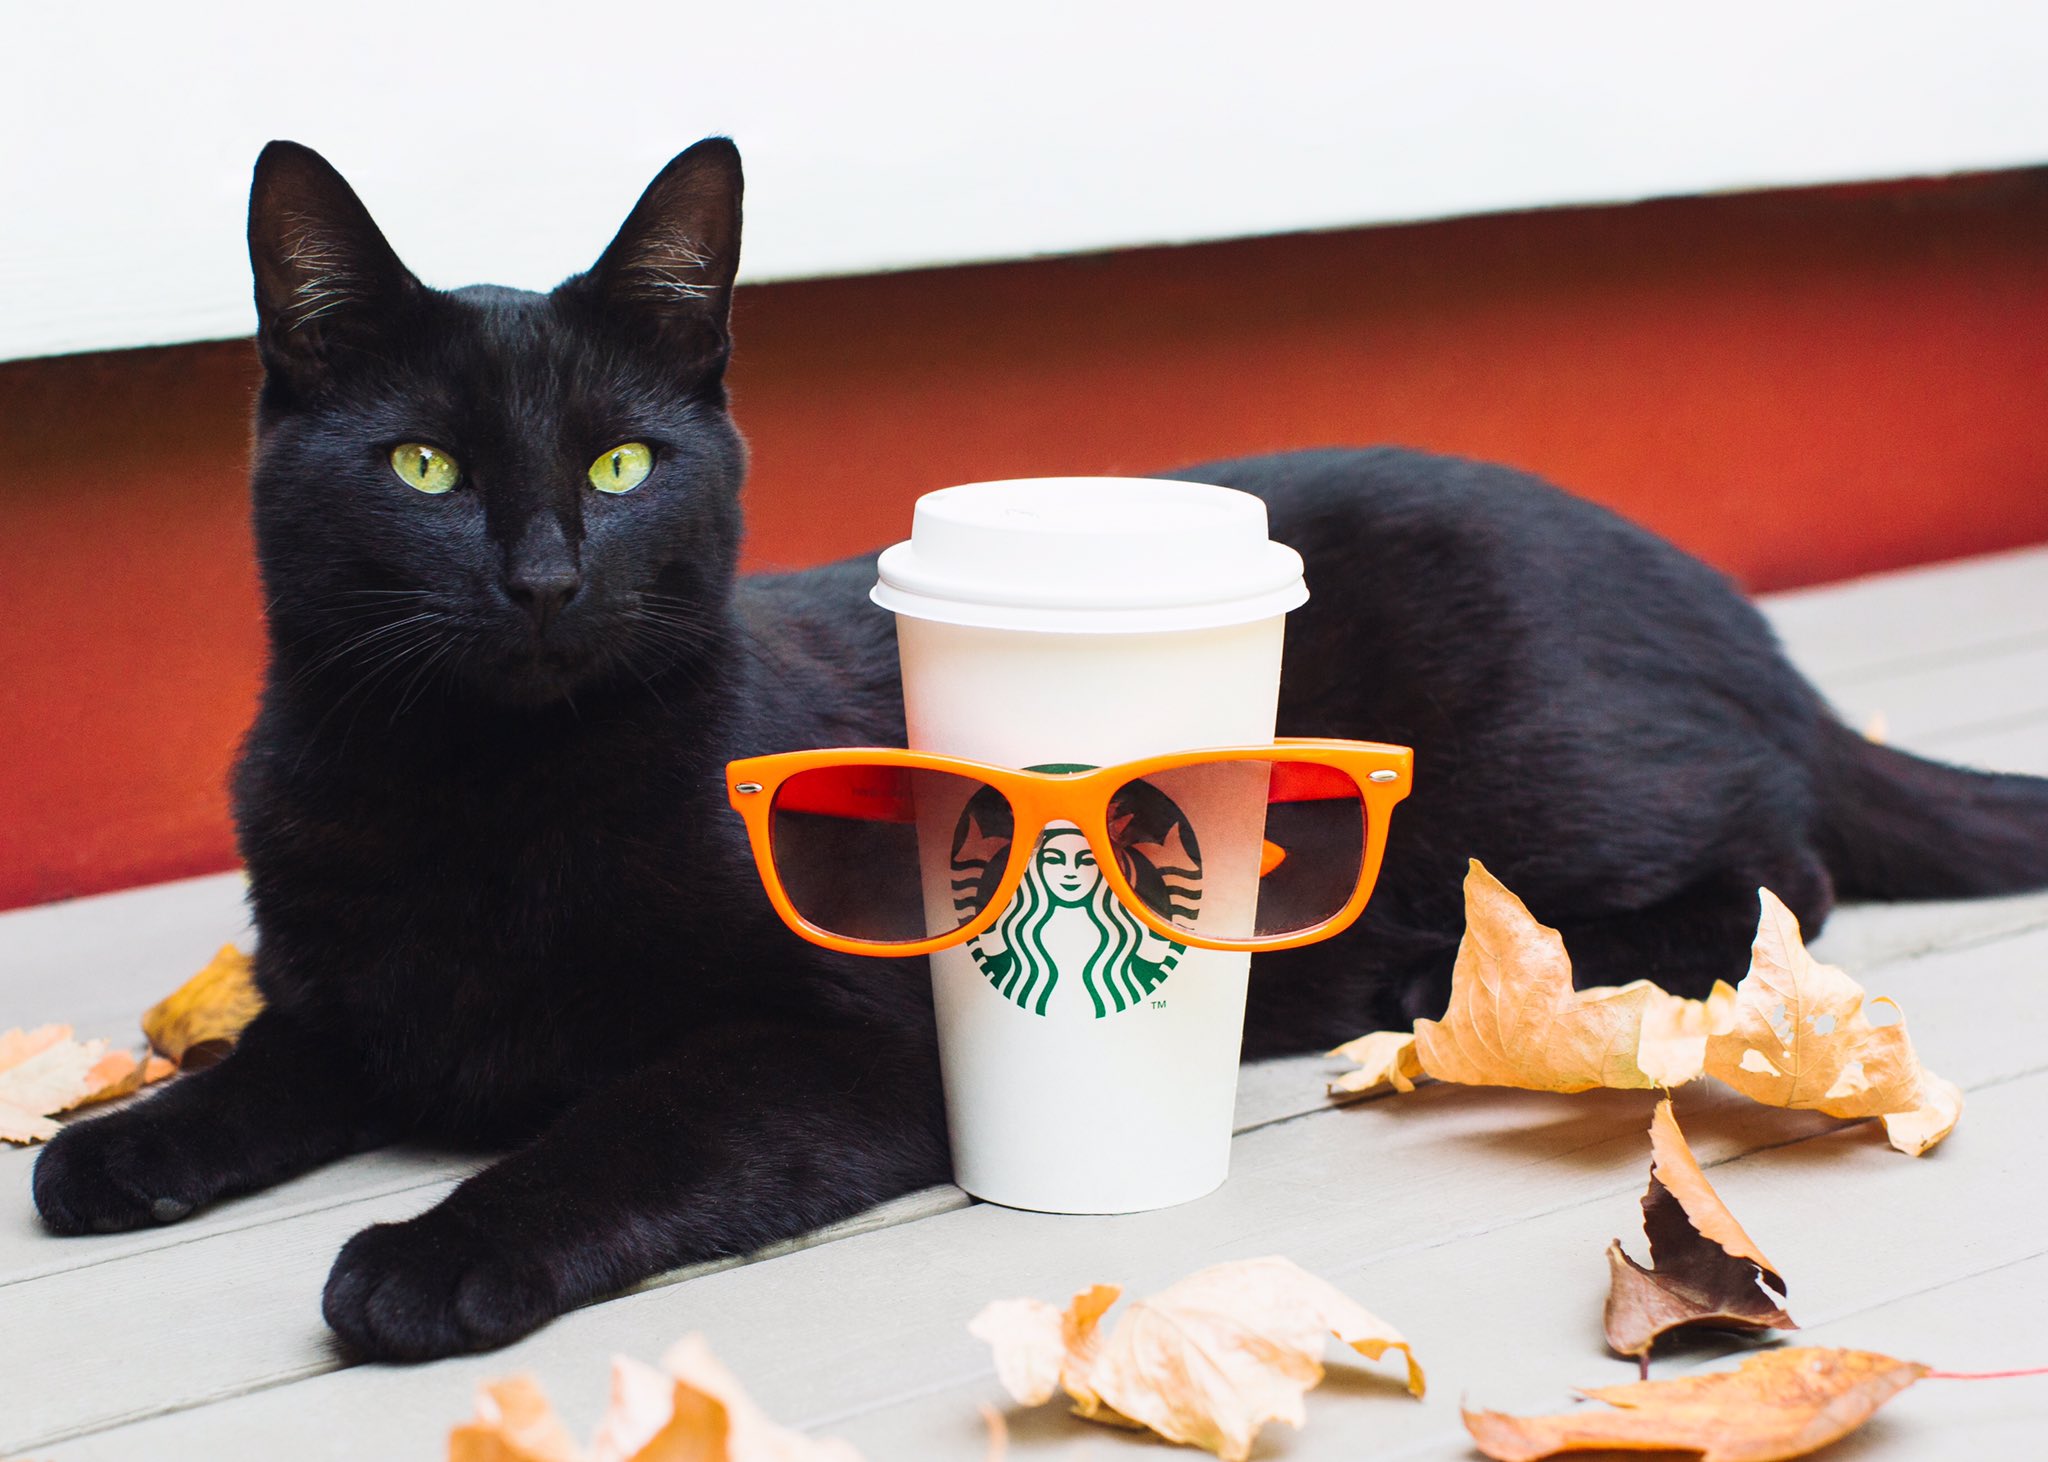 That Starbucks Pumpkin Spice Latte May Cost You More This Year